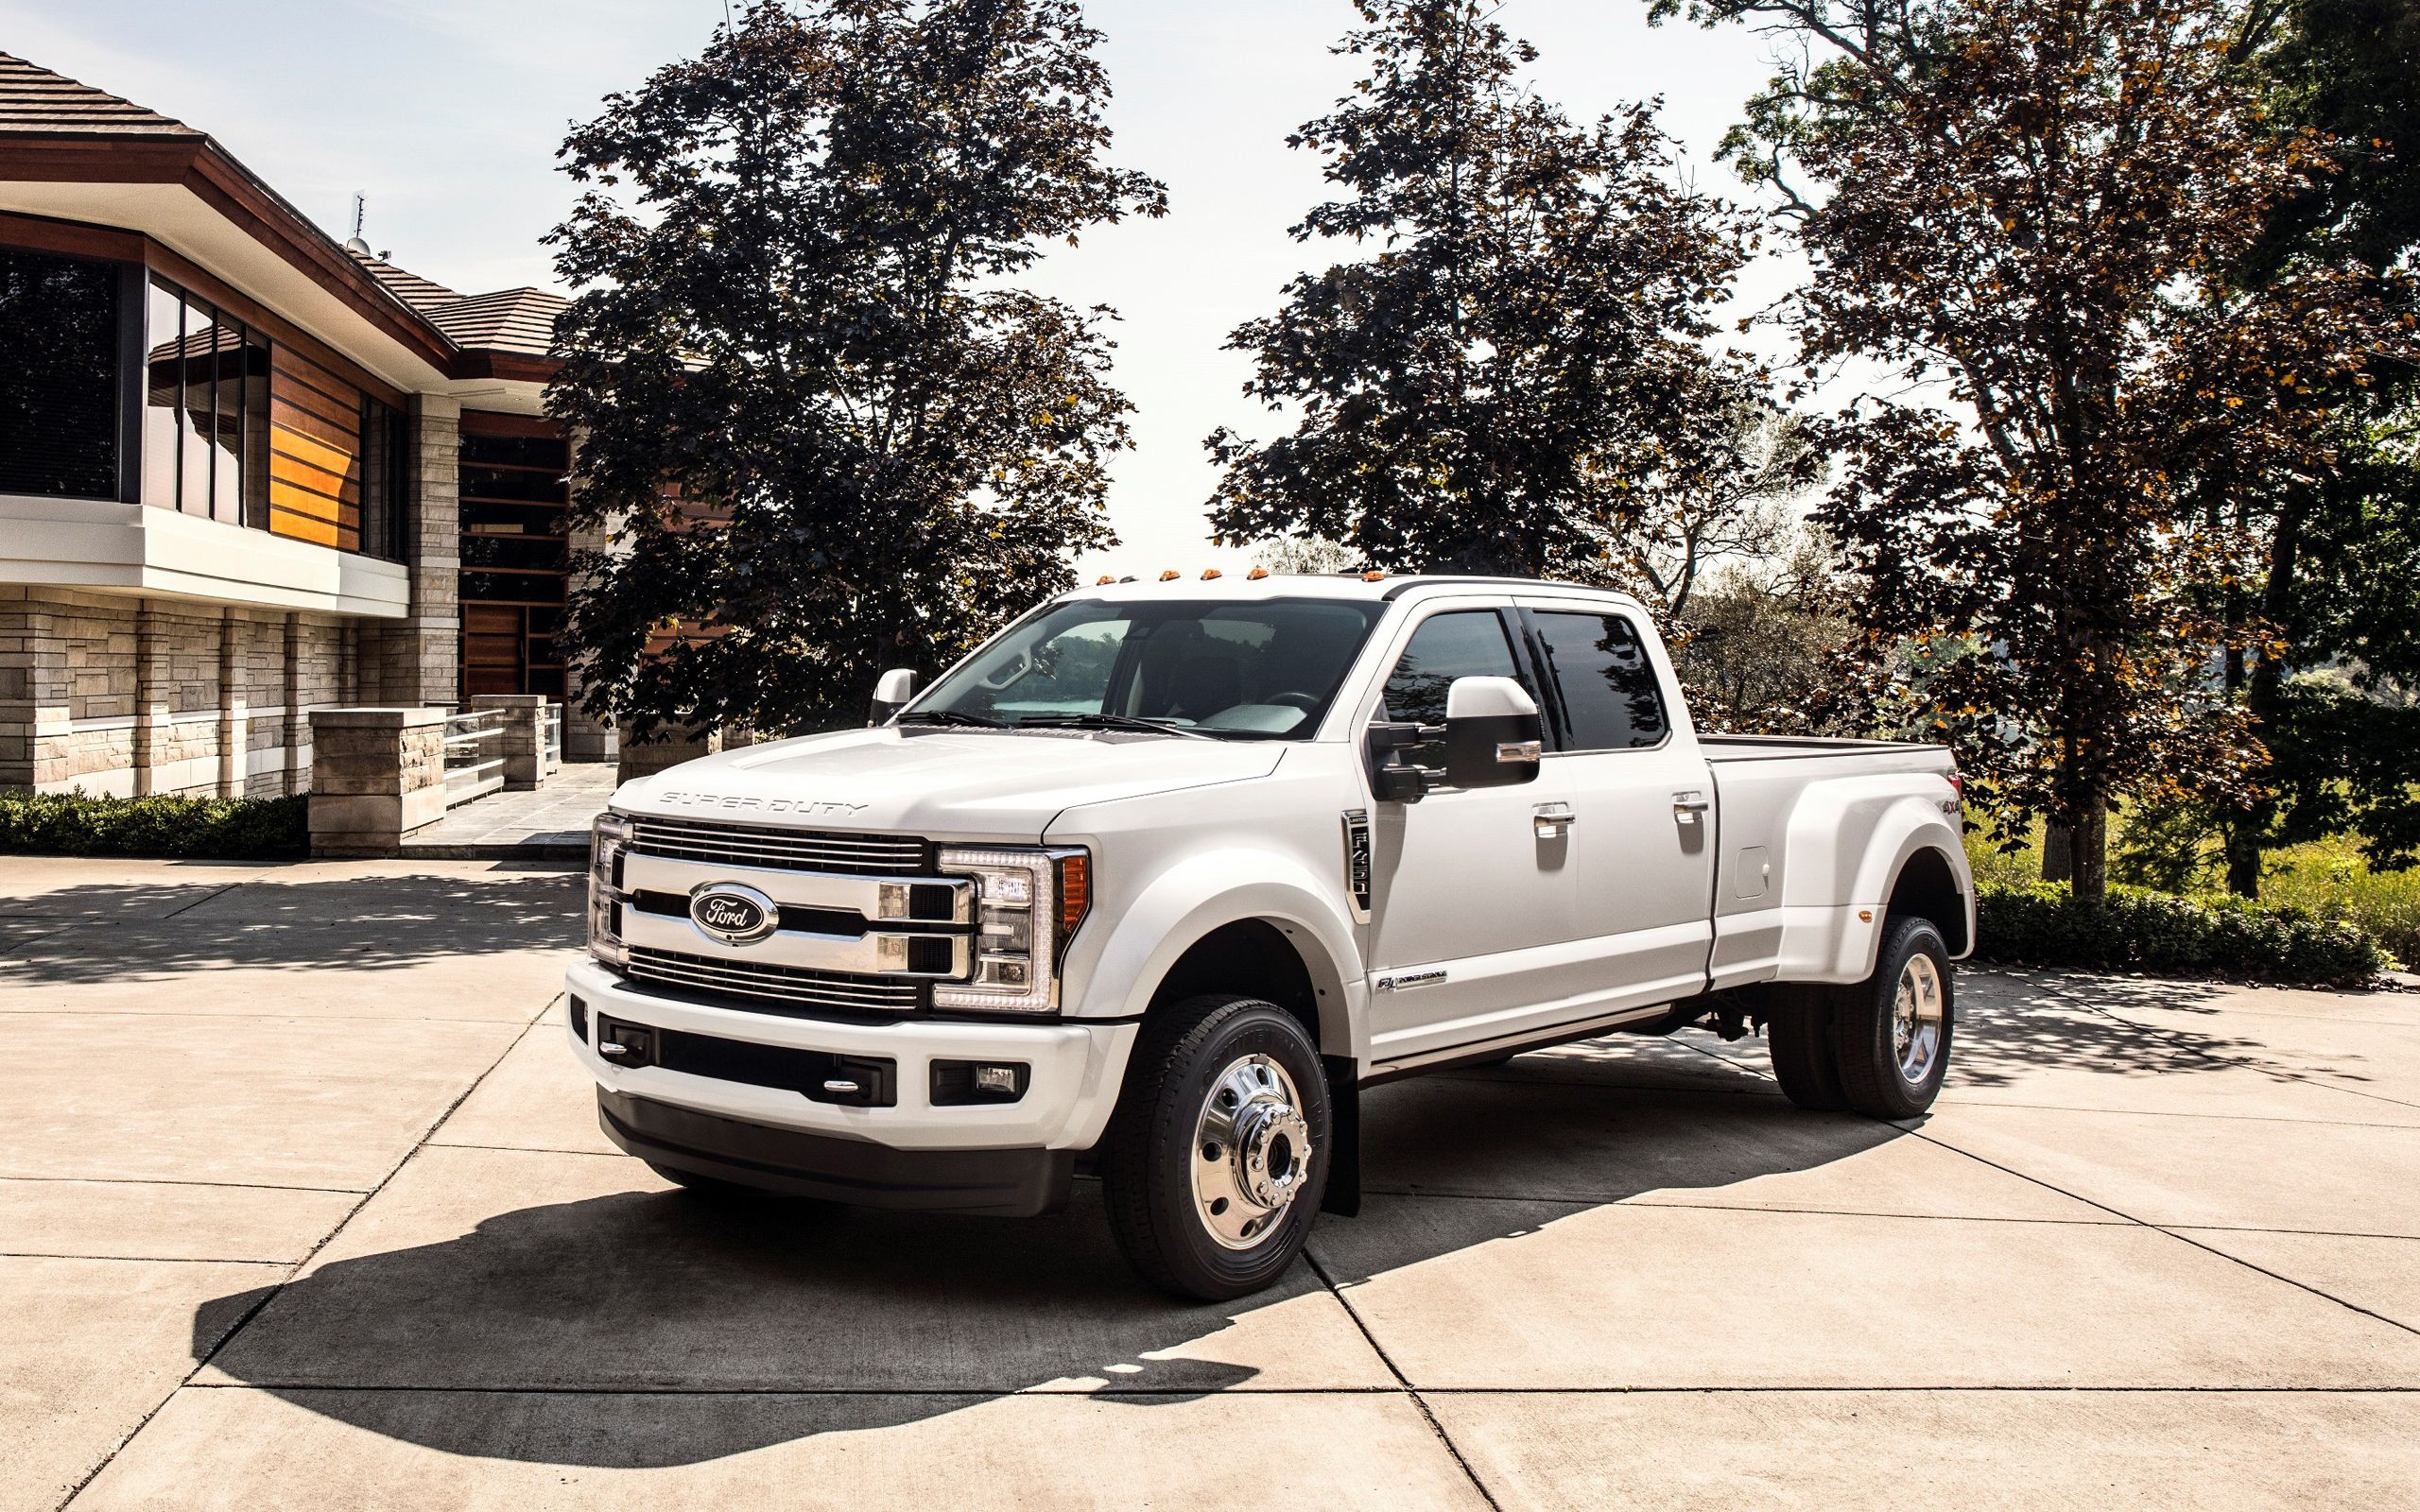 Download Wallpaper Ford F 450 Limited, White Pickup Truck, American Cars, New F Ford For Desktop With Resolution 2560x1600. High Quality HD Picture Wallpaper